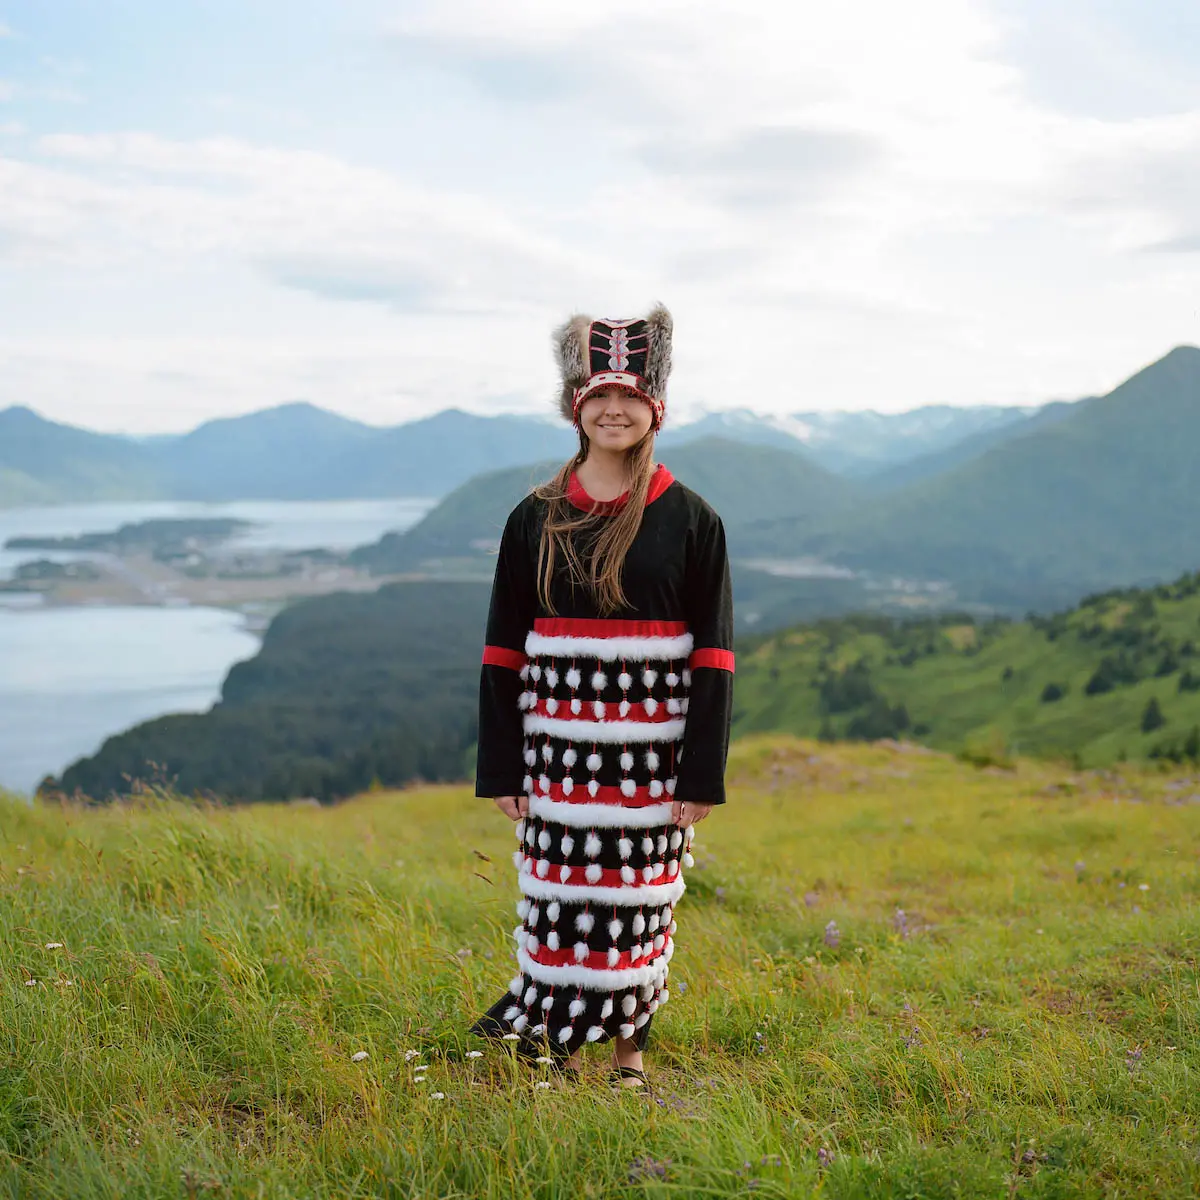 A girl in regalia standing before a mountainscape.